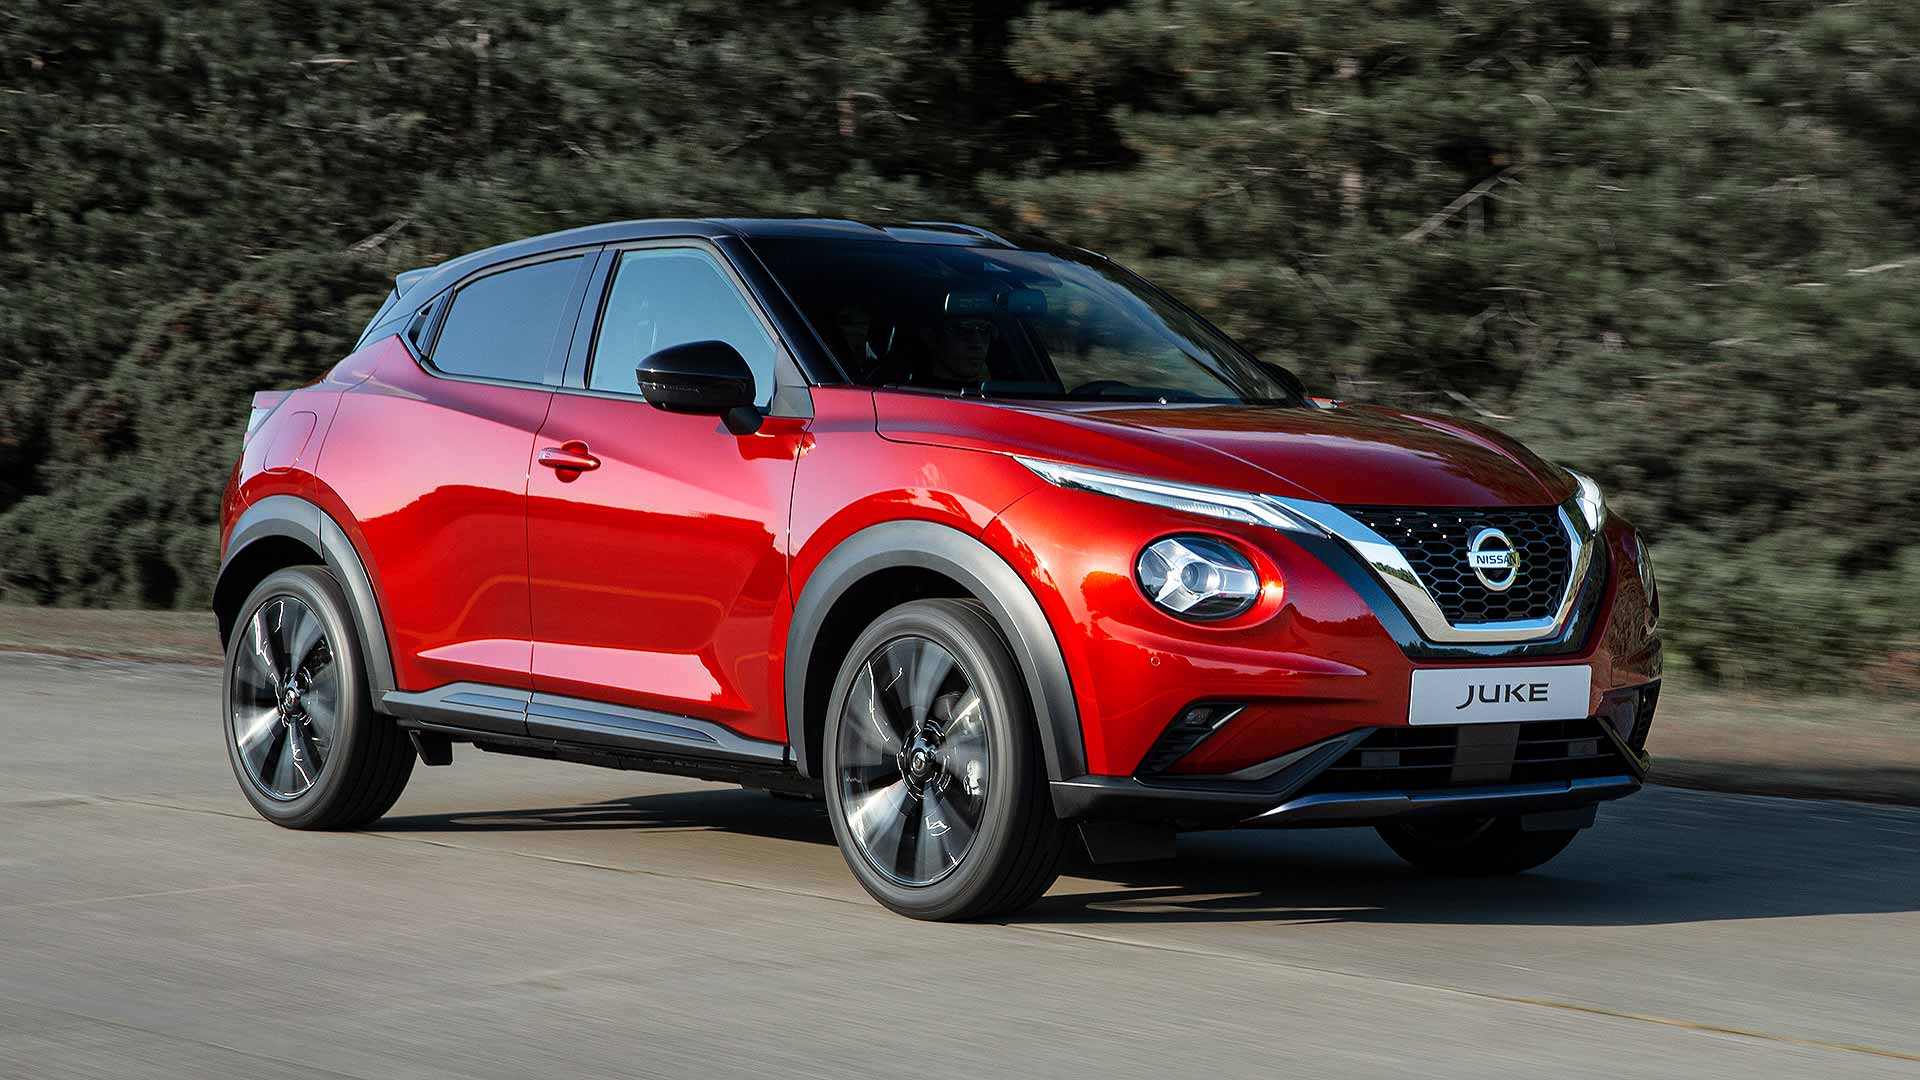 2020 Nissan Juke first look: the all-new original | Motoring Research